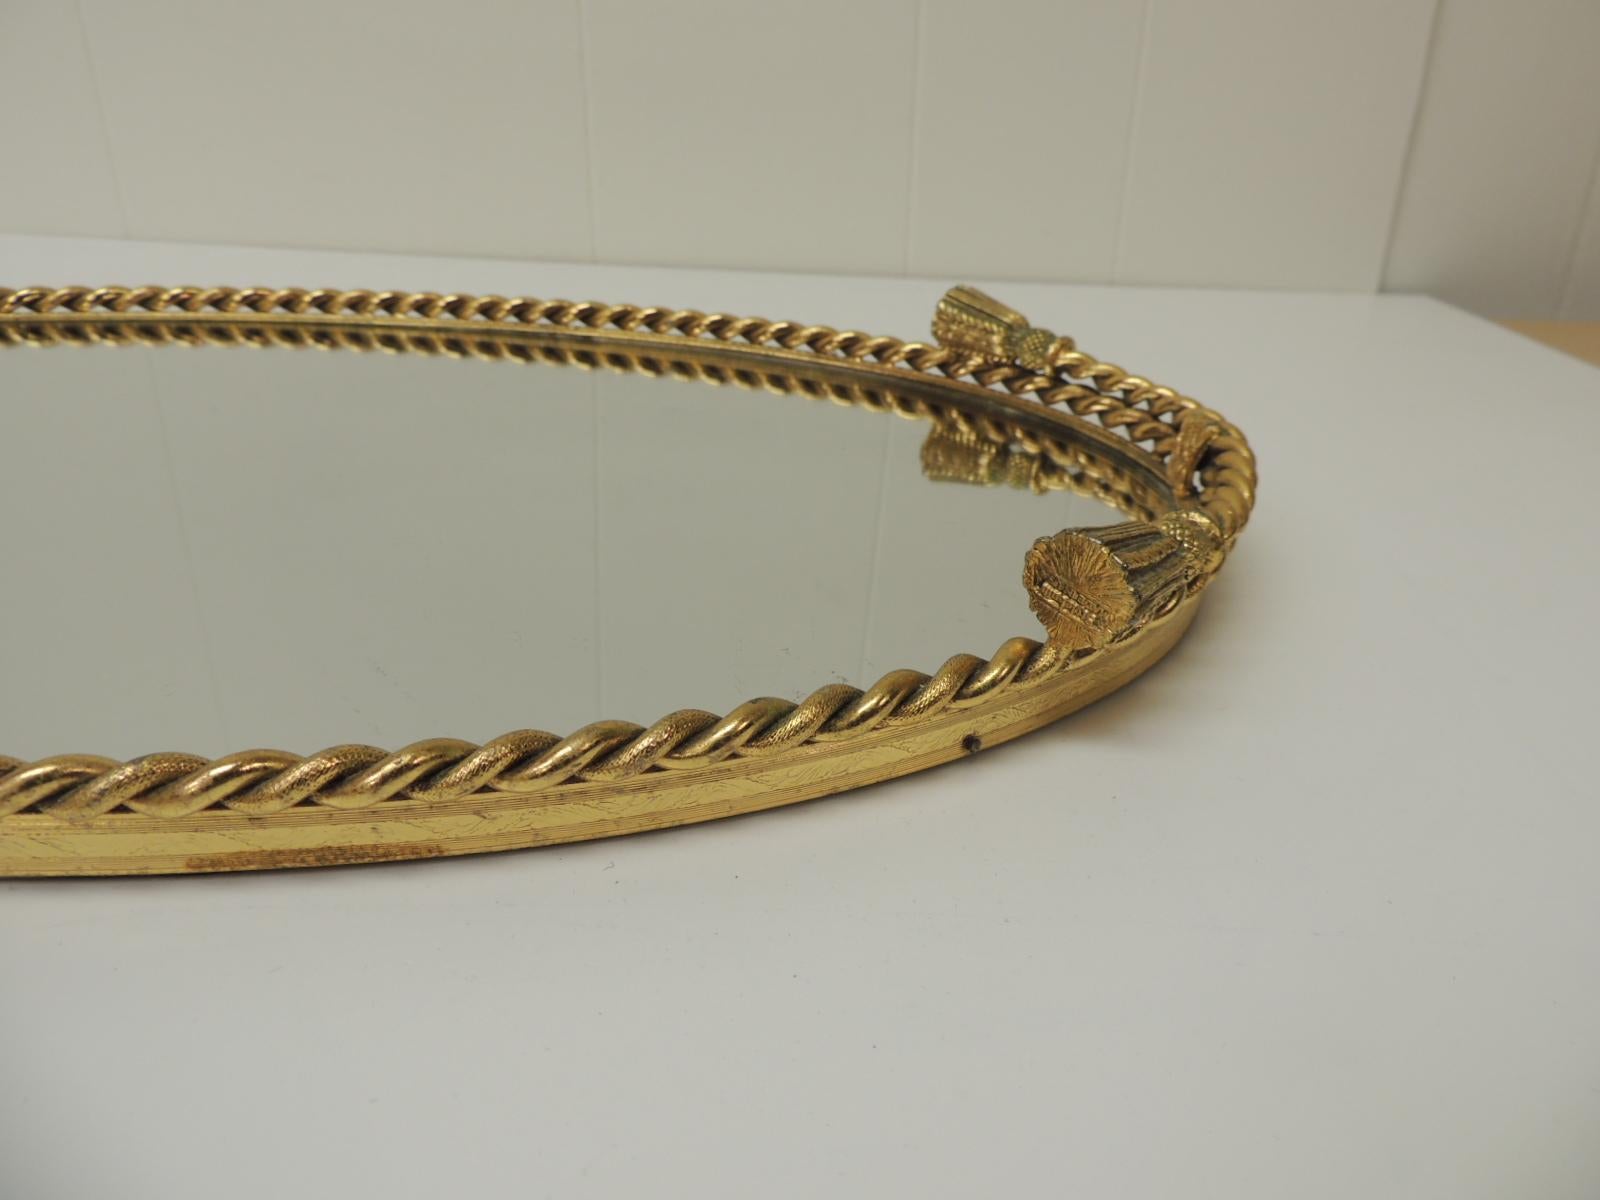 Vintage French rope and tassels large oval brass vanity tray with mirror
Rope and tassels all around the tray edge with oval mirror inset. Felt backing.
French, 1950s.
Size: 18.5 x 11 x 1.5.
 